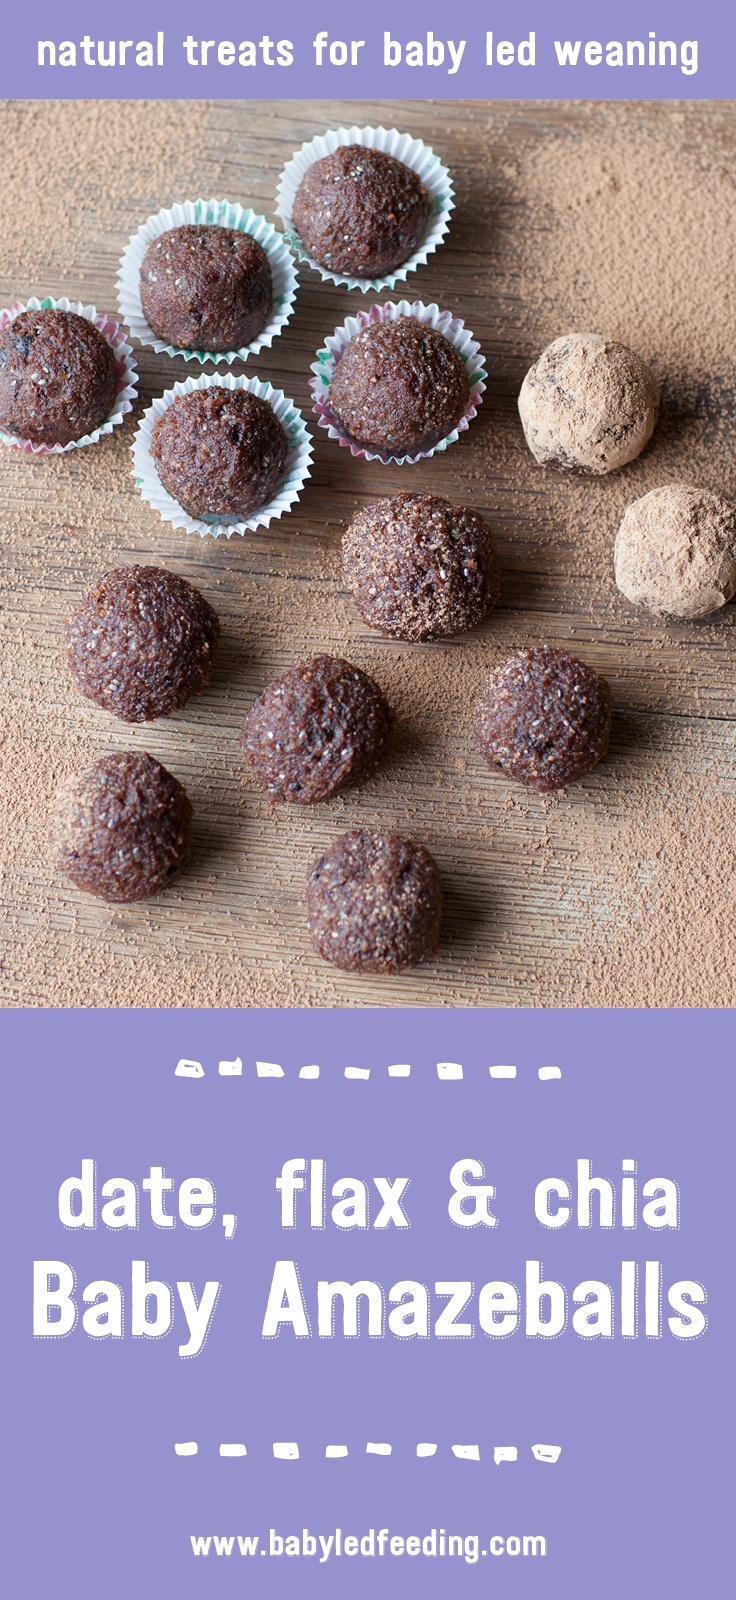 10 minute Baby Amazeballs! Date, Flax and Chia rolled into a healthy finger food for babies and toddlers. VEGAN, vegetarian, refined sugar free and high in protein, fiber, and magnesium.This easy and healthy recipe works great as a sweet appetizer freezer friendly. No cooking required! #amazeballs #babyledfeeding #appetizer #freezerfood #fingerfood @via https://www.pinterest.ie/babyledfeeding/